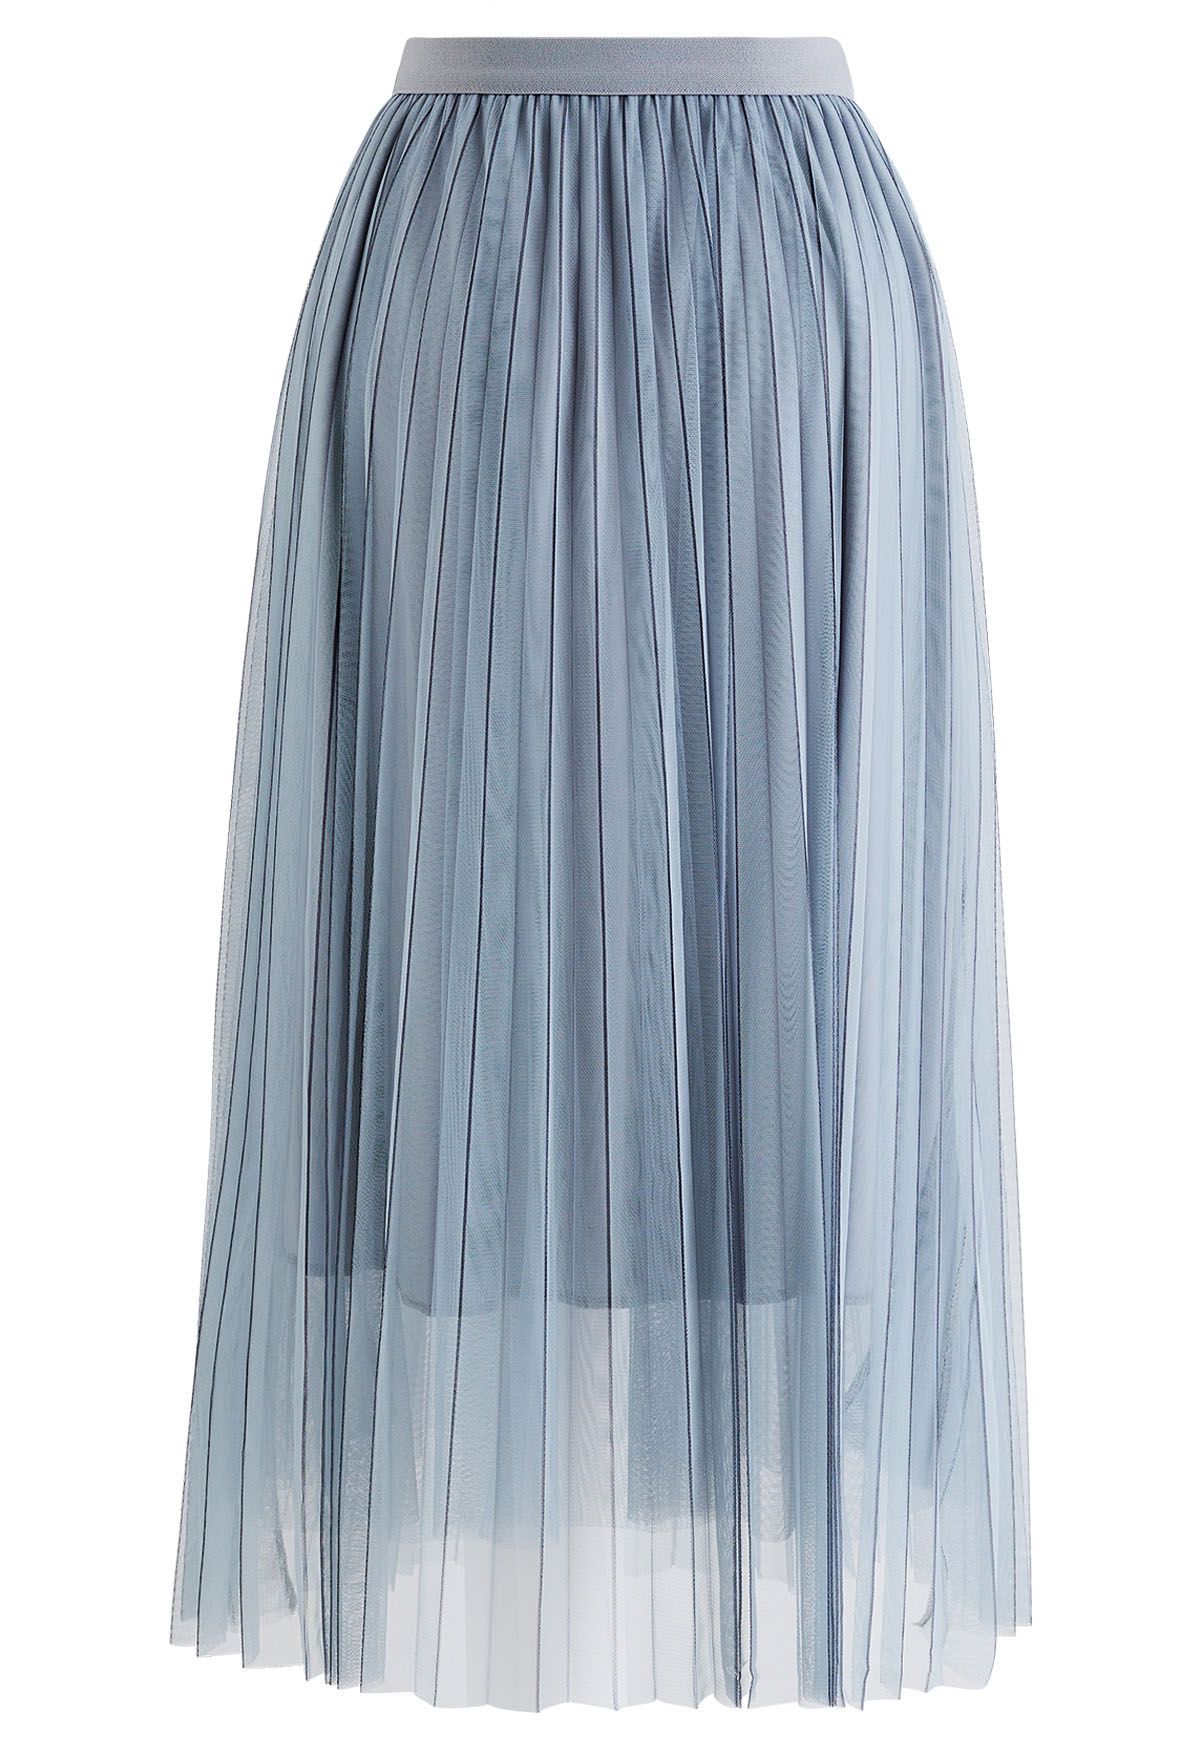 Contrast Lines Pleated Mesh Tulle Midi Skirt in Dusty Blue